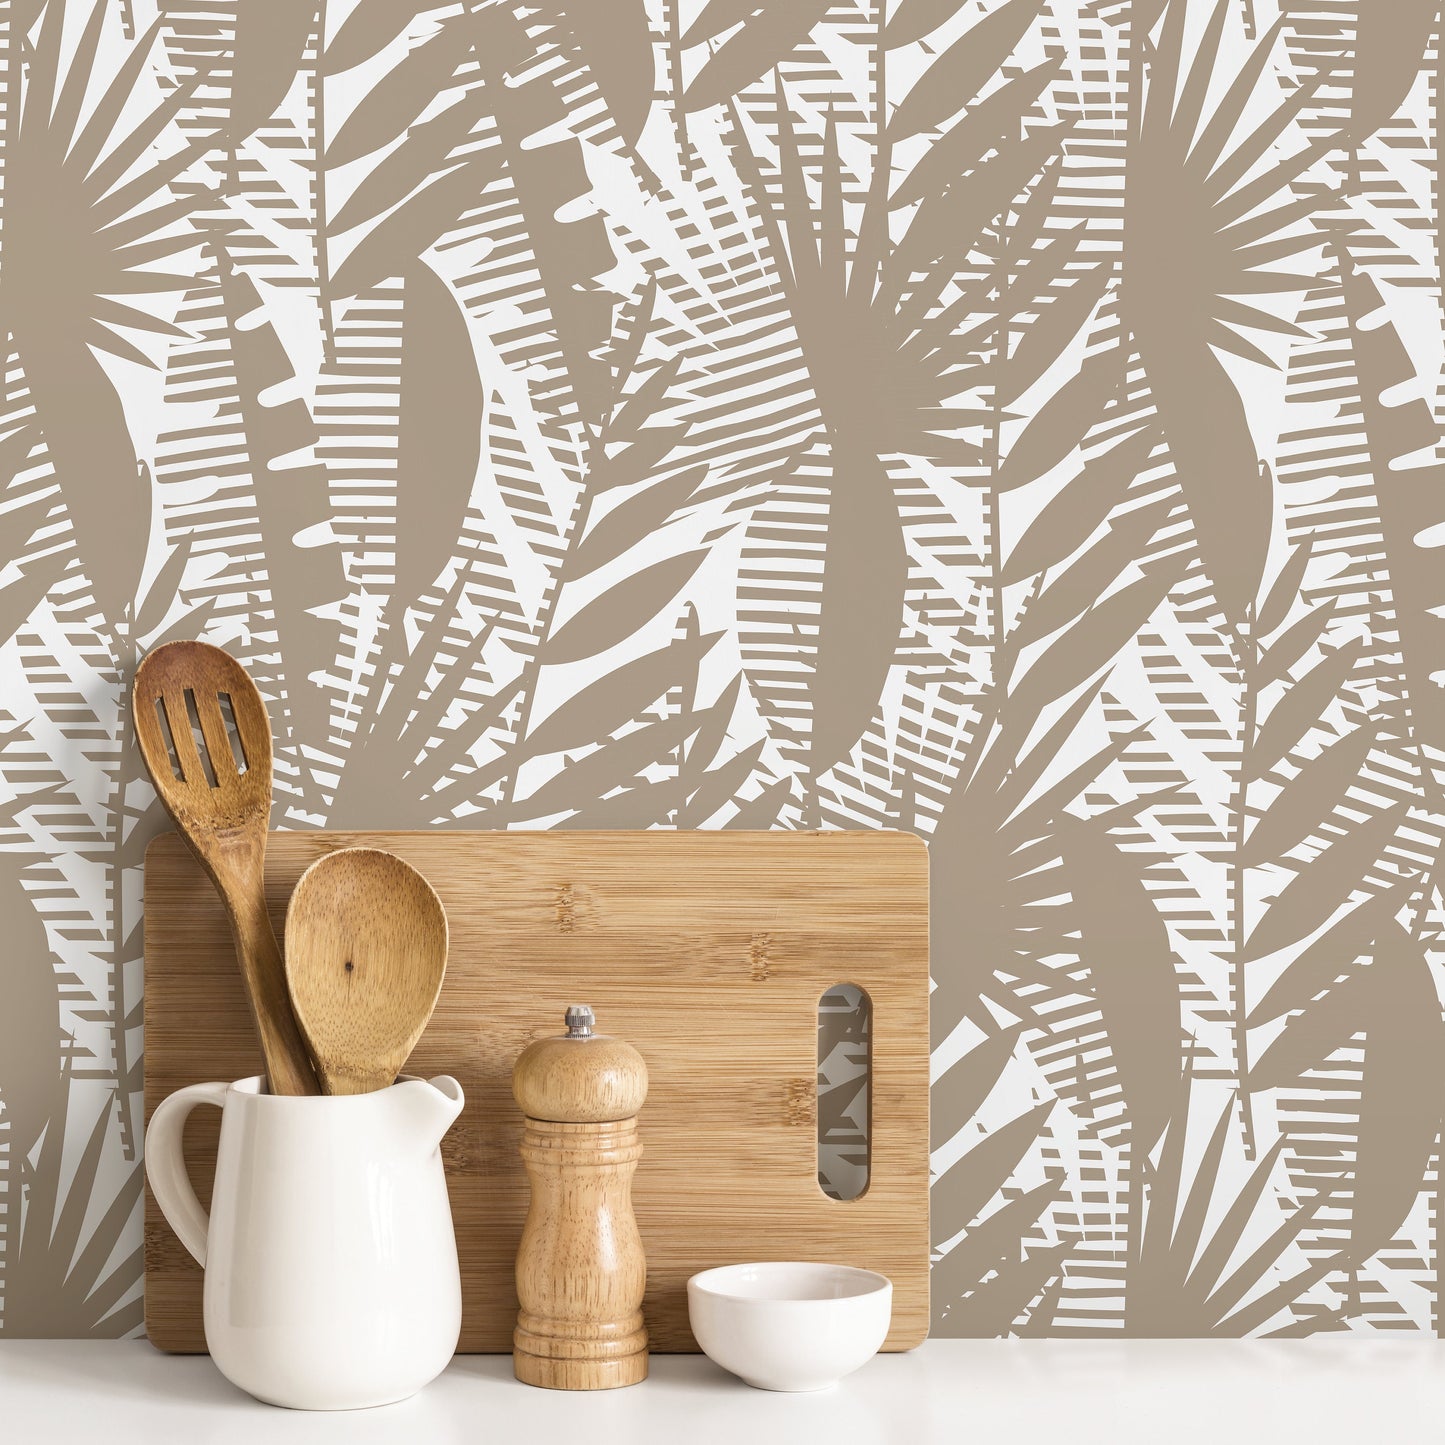 Wallpaper Peel and Stick Wallpaper Removable Wallpaper Home Decor Wall Art Wall Decor Room Decor / Abstract Beige Leaves Wallpaper - C402